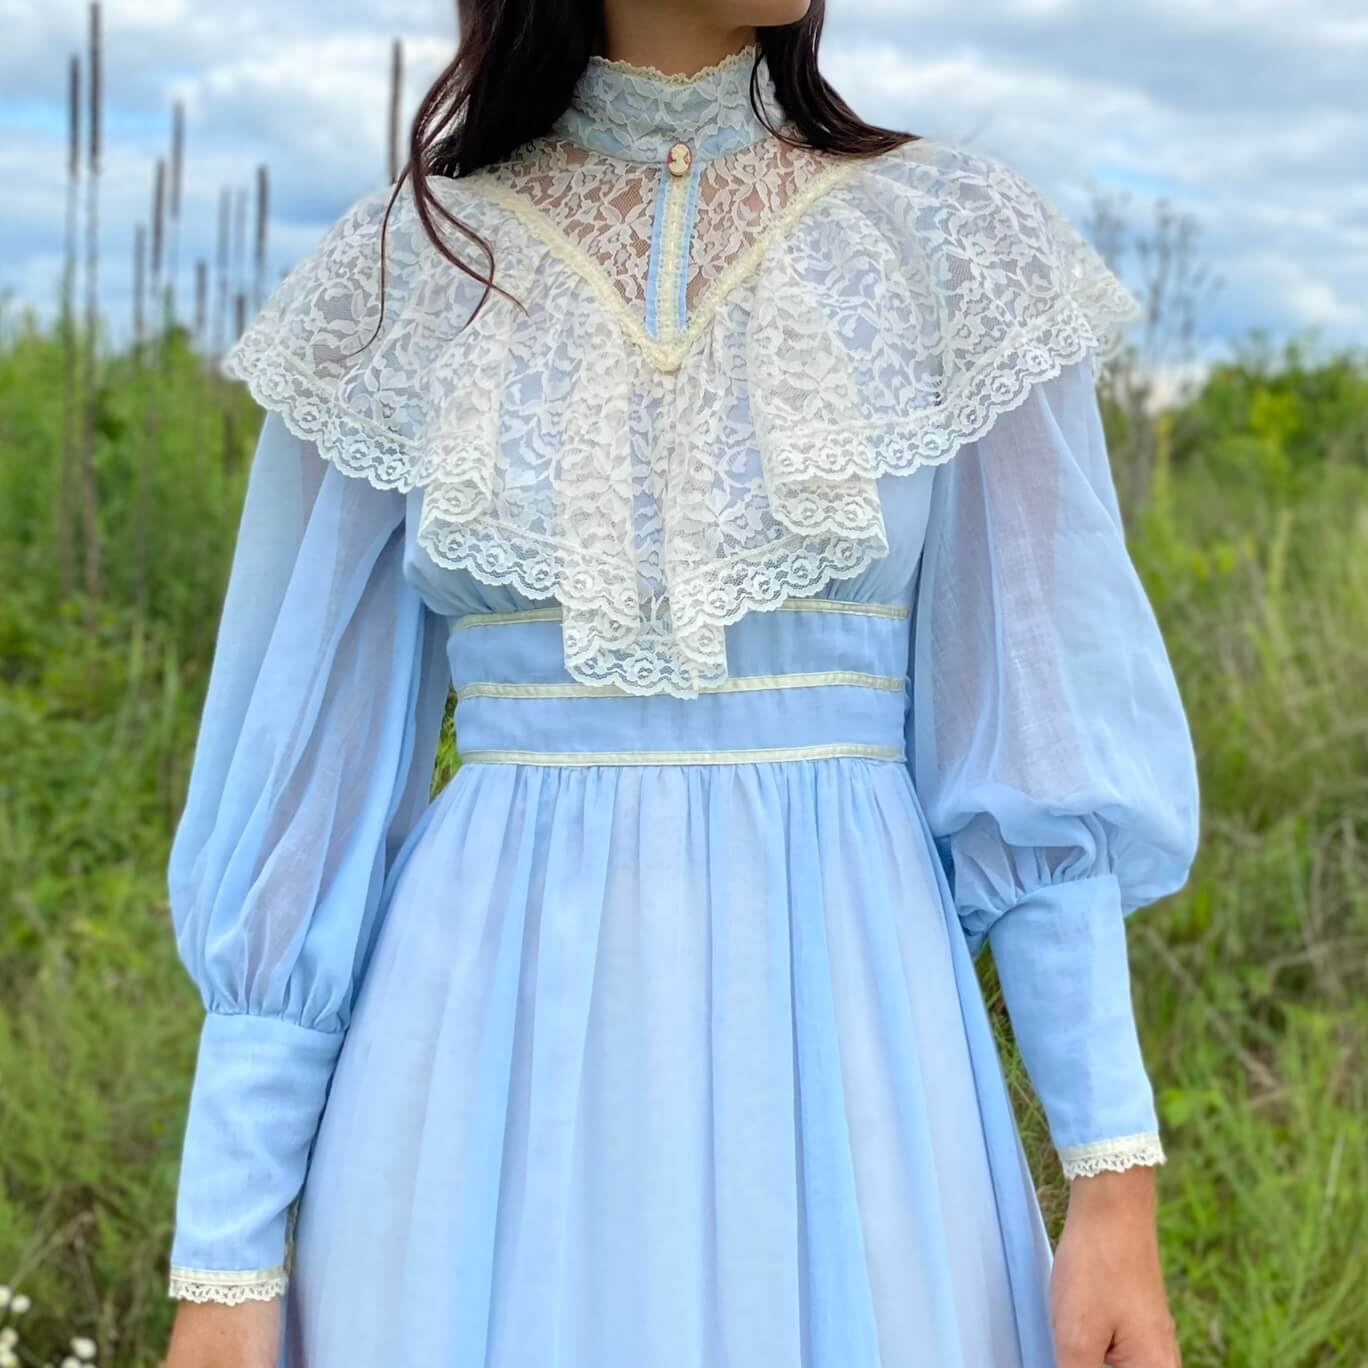 detail of blue cotton dress with white lace ruffle and high neck collar with a field in the background